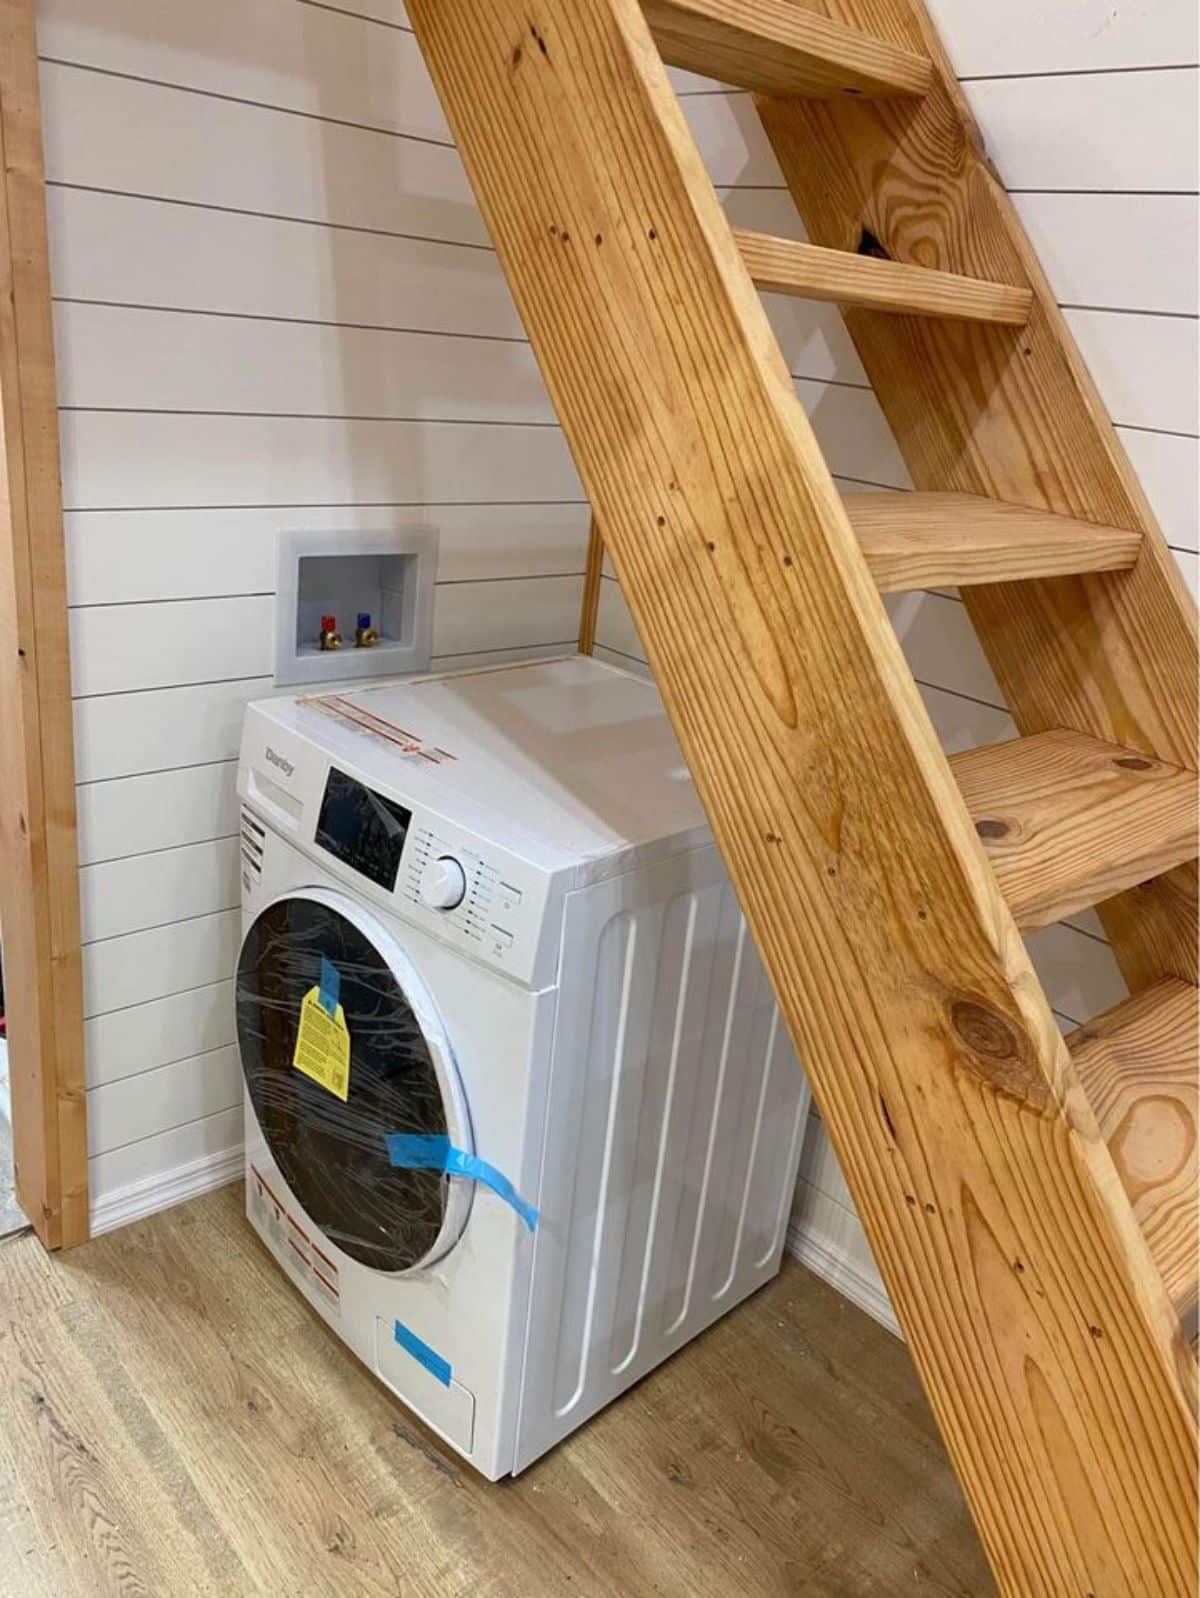 washer dryer combo under the stairs is also included in the deal